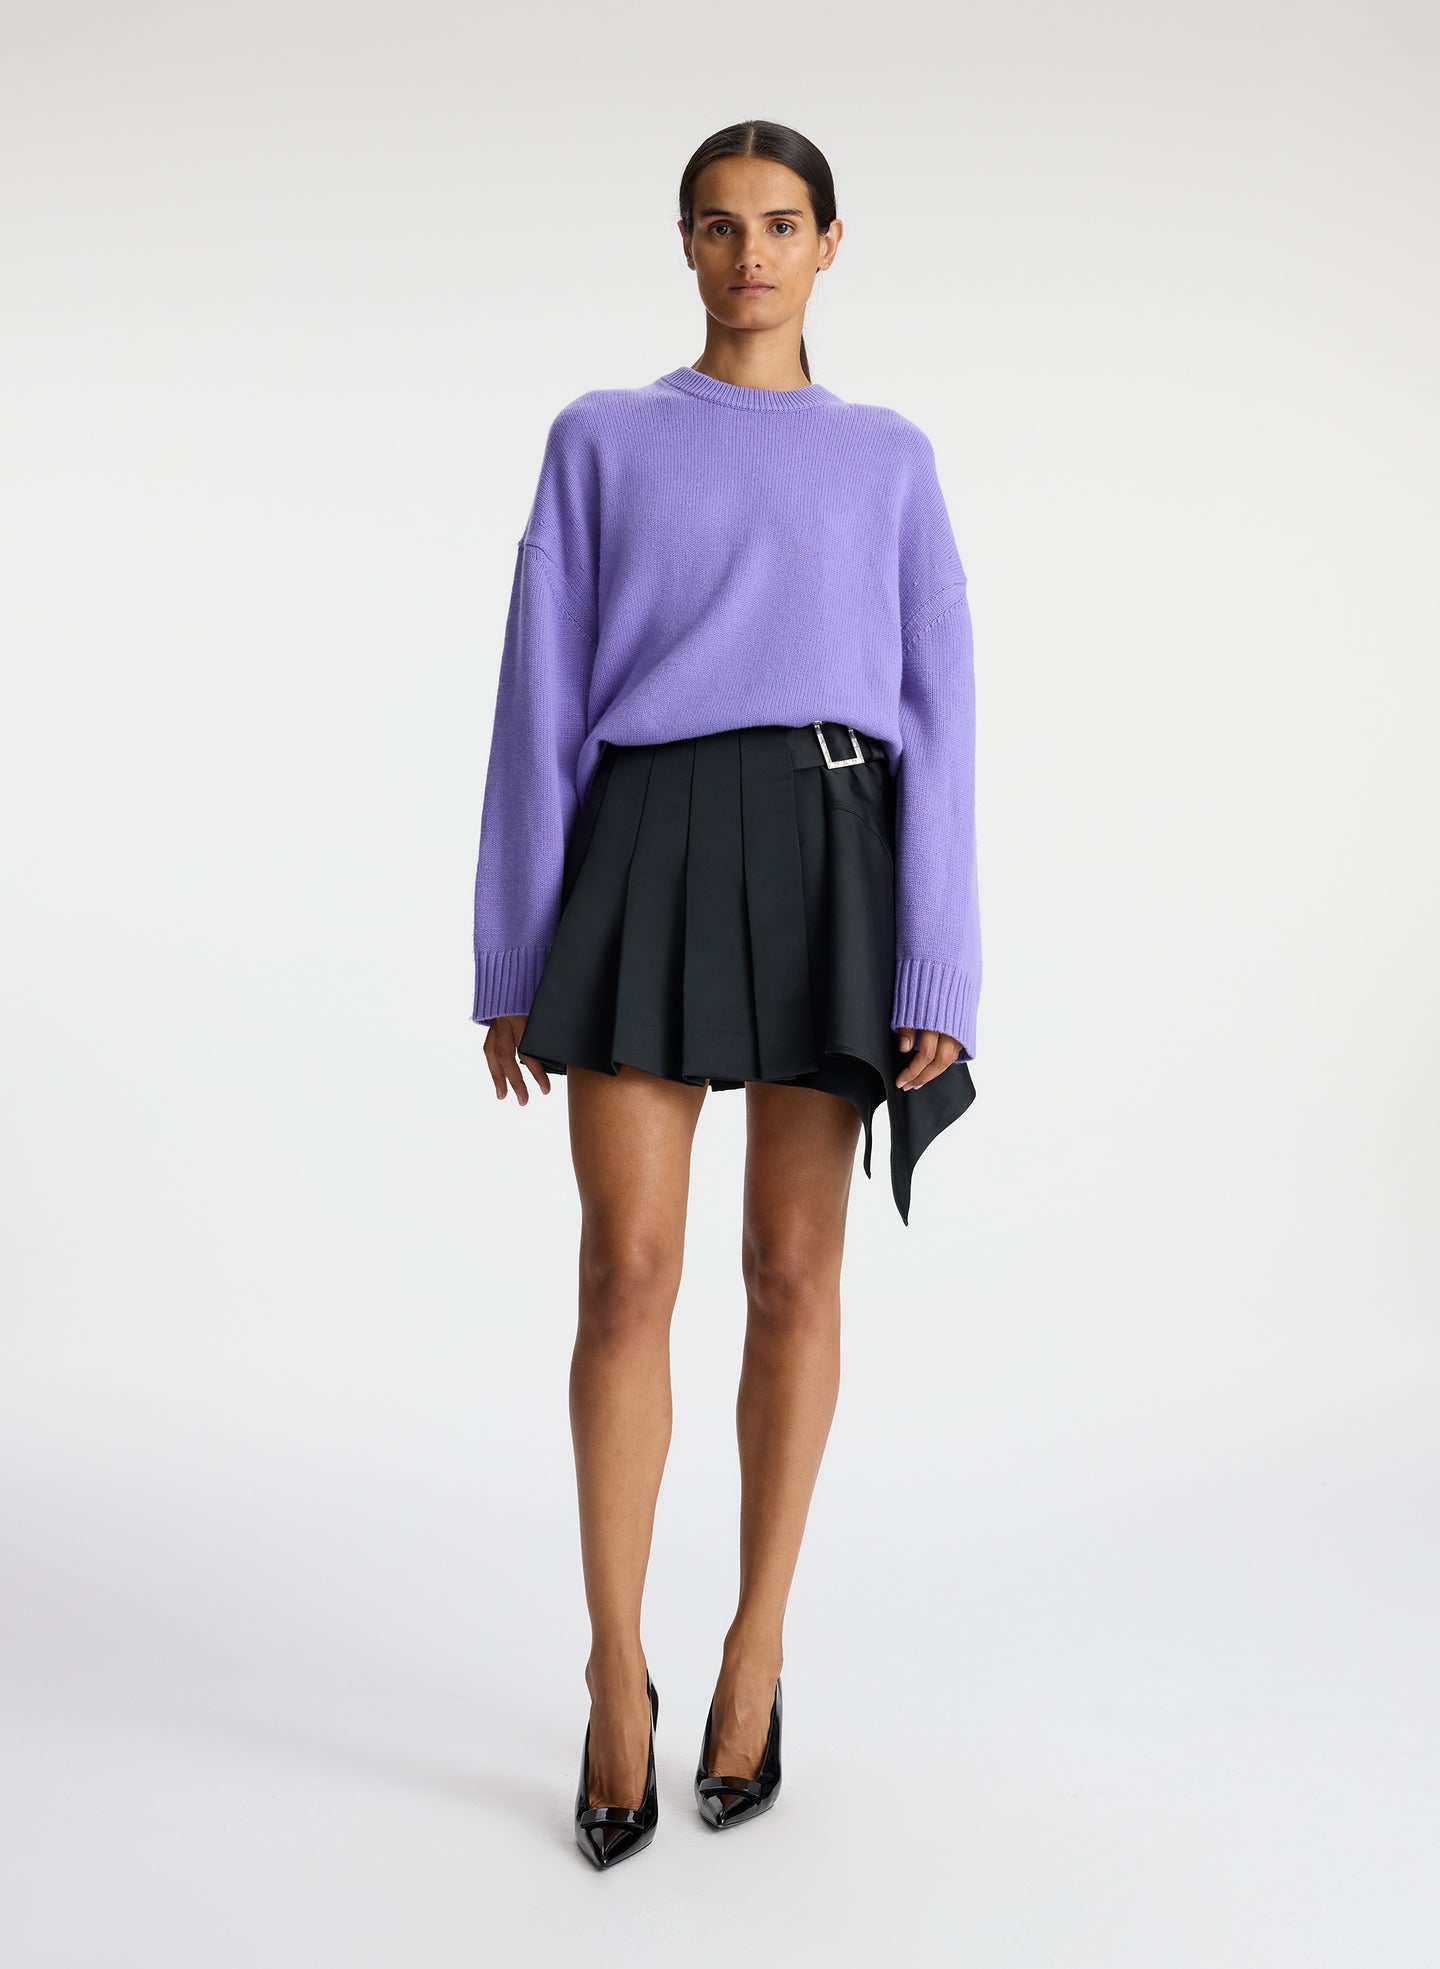 front view of woman wearing purple sweater and black pleated mini skirt